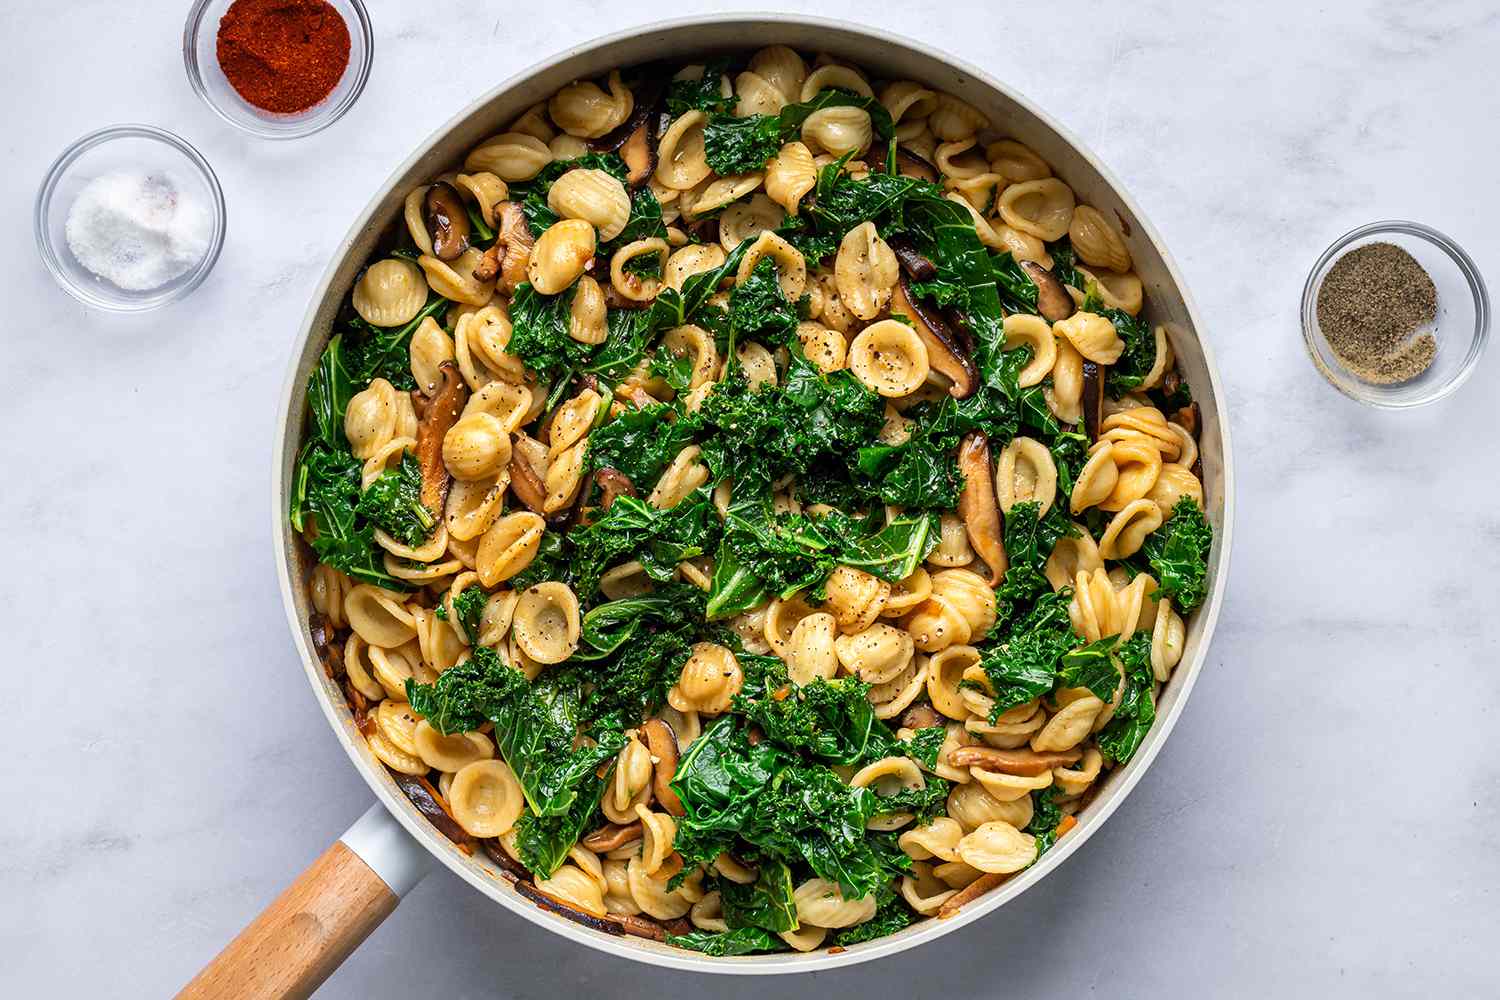 A skillet of pasta, greens, and mushrooms mixed together with smoked paprika, salt, and pepper